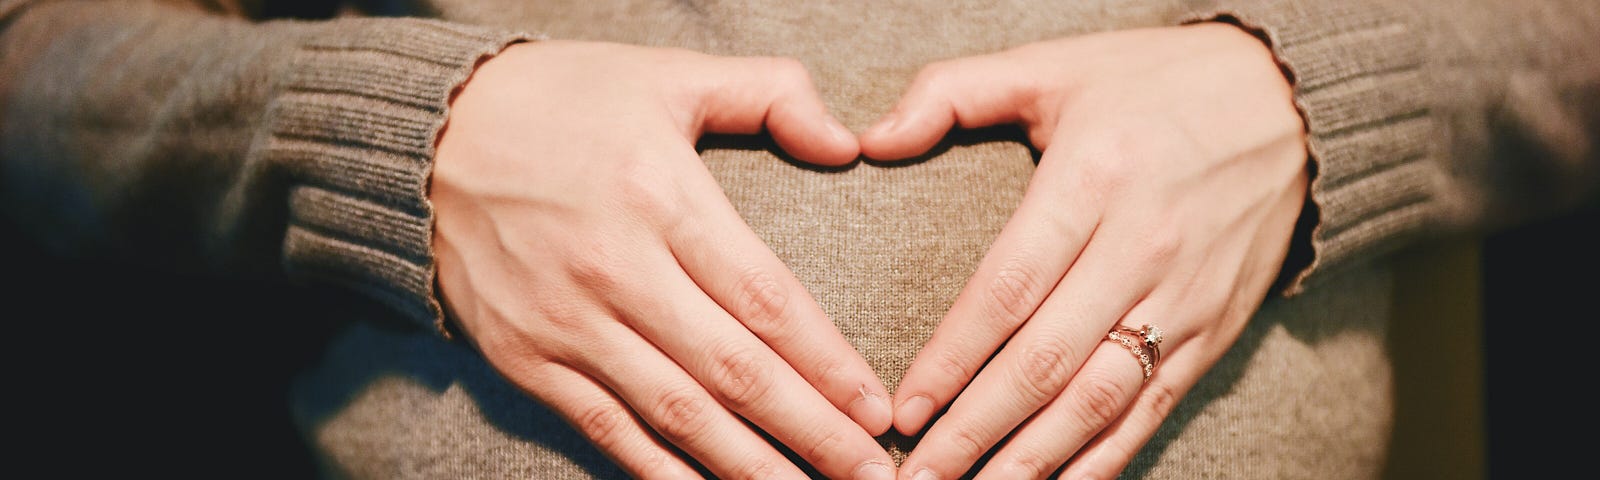 Hands in shape of a heart rest on a pregnant belly.